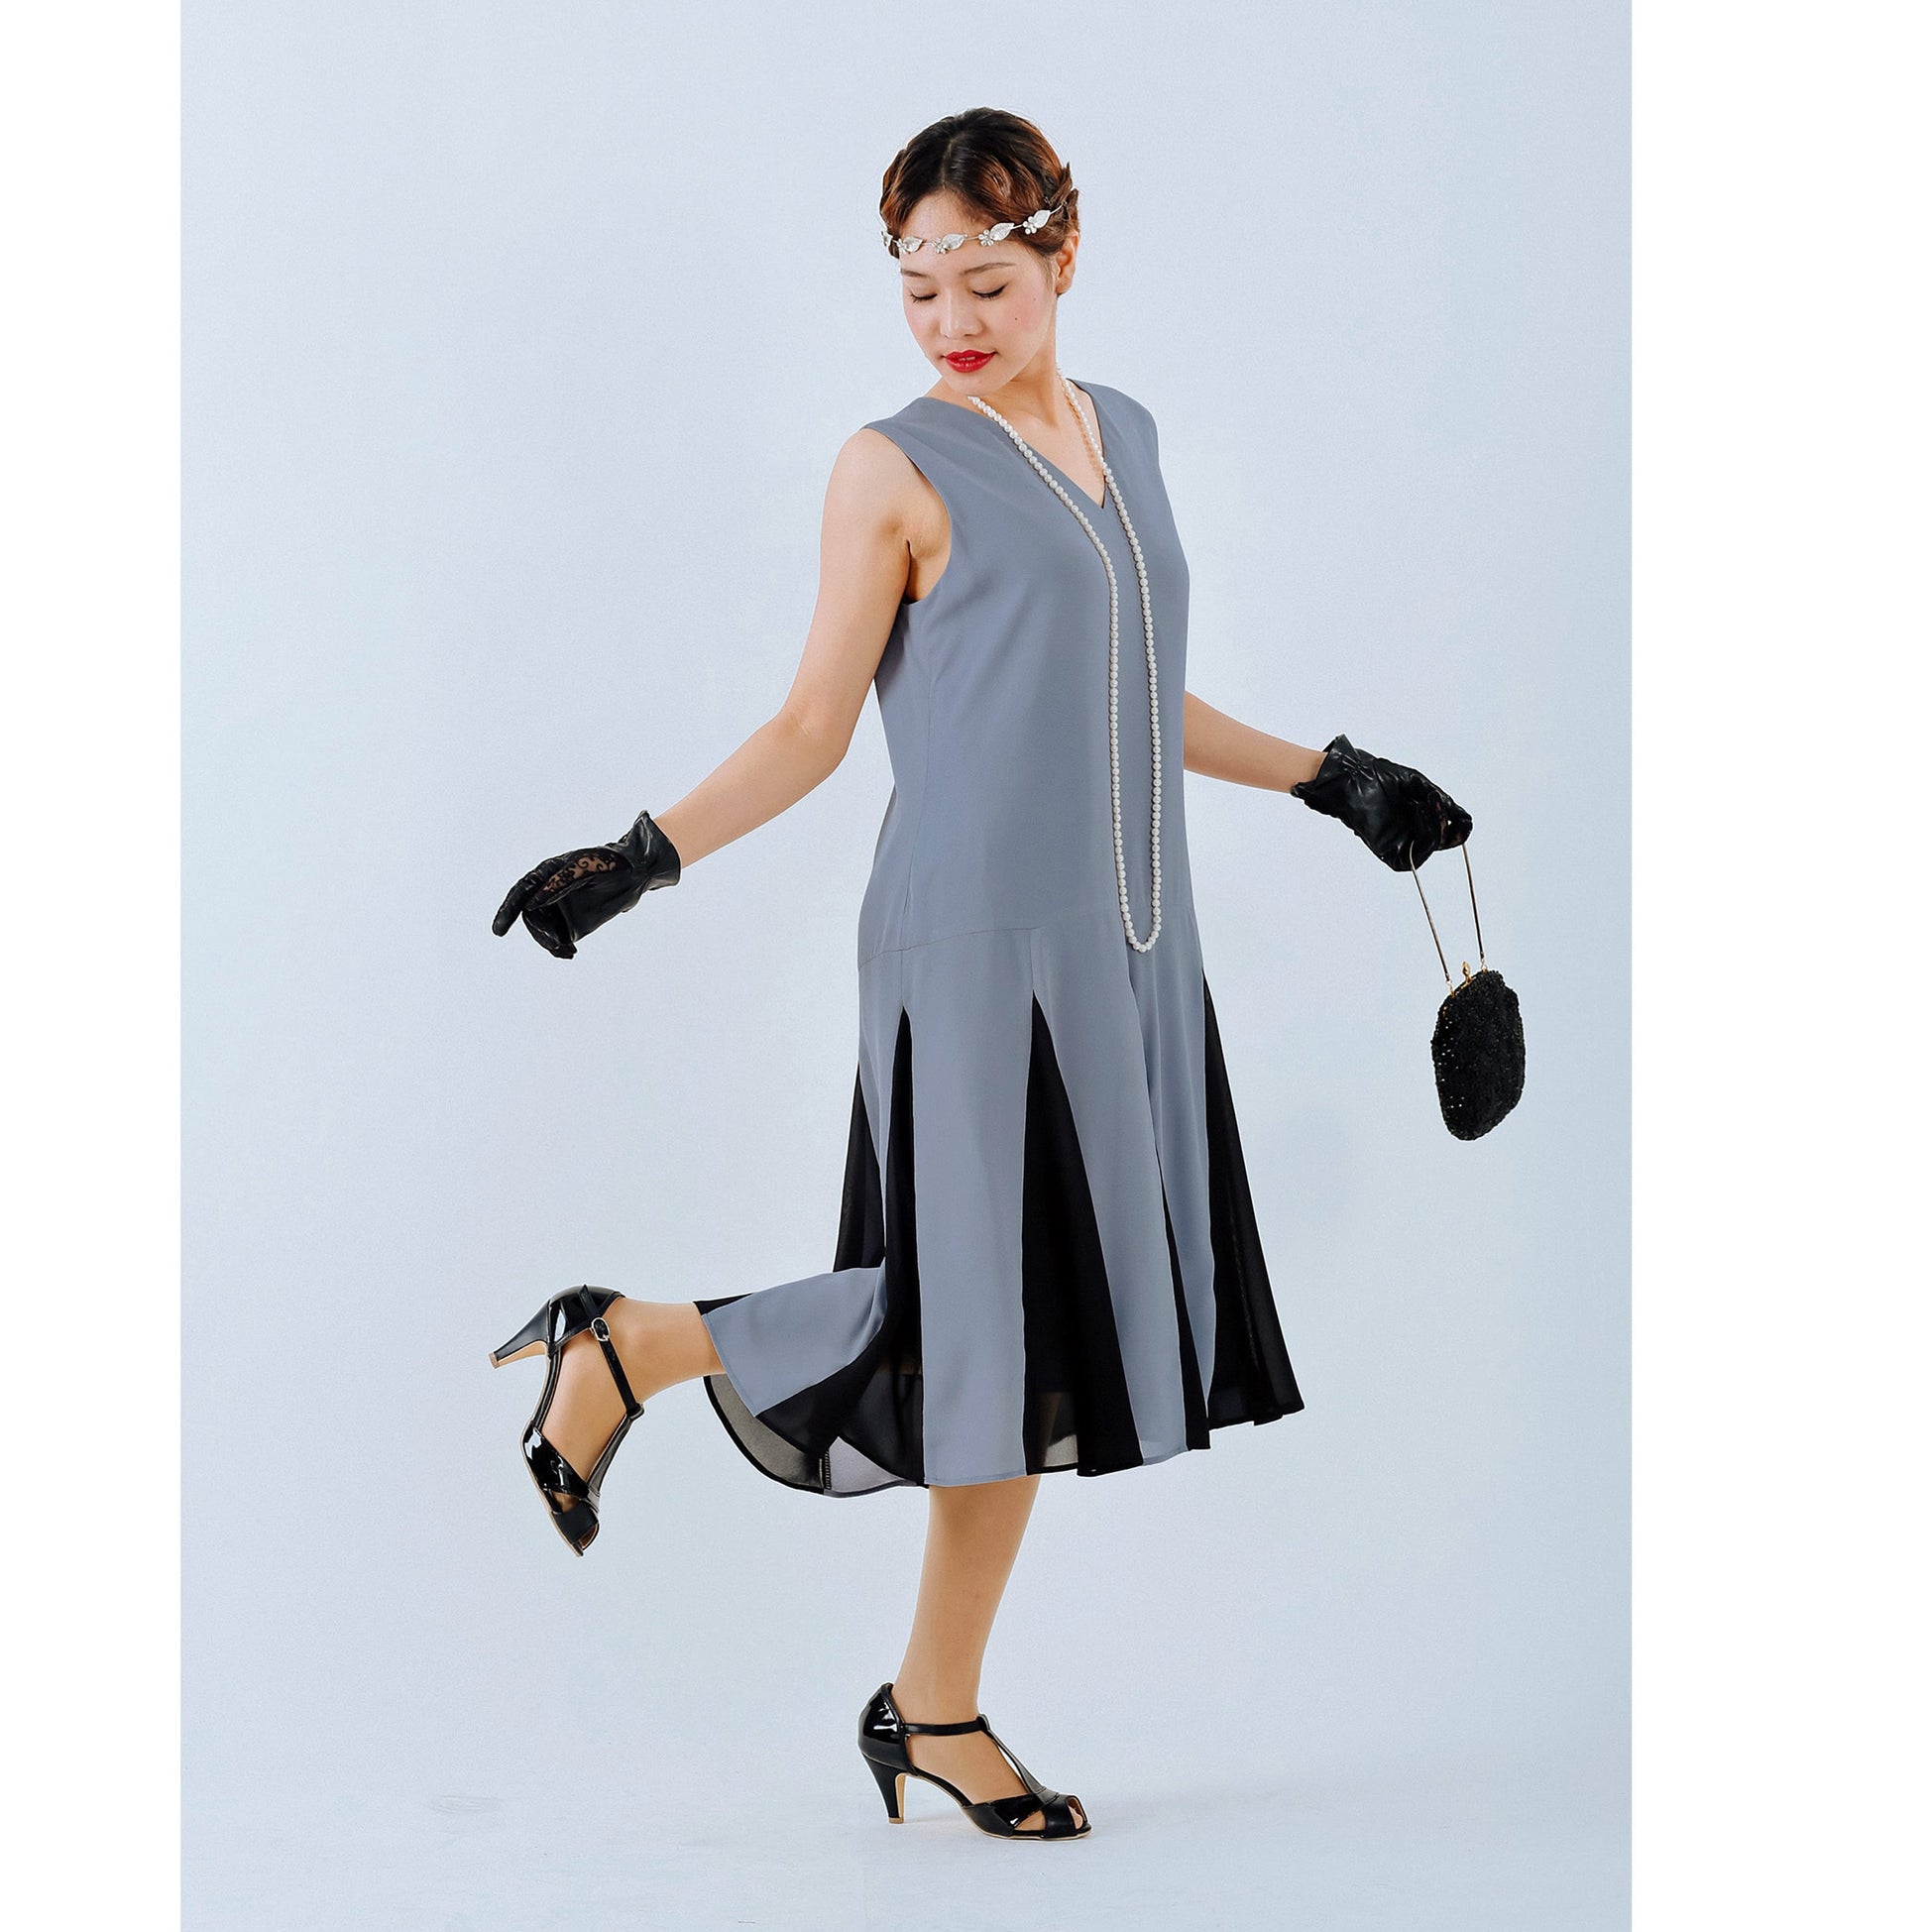 Chiffon Gatsby dress in grey and black. The 1920s dress can be worn as a Charleston dance dress,  roaring 20s flapper dress or 20s party dress. 